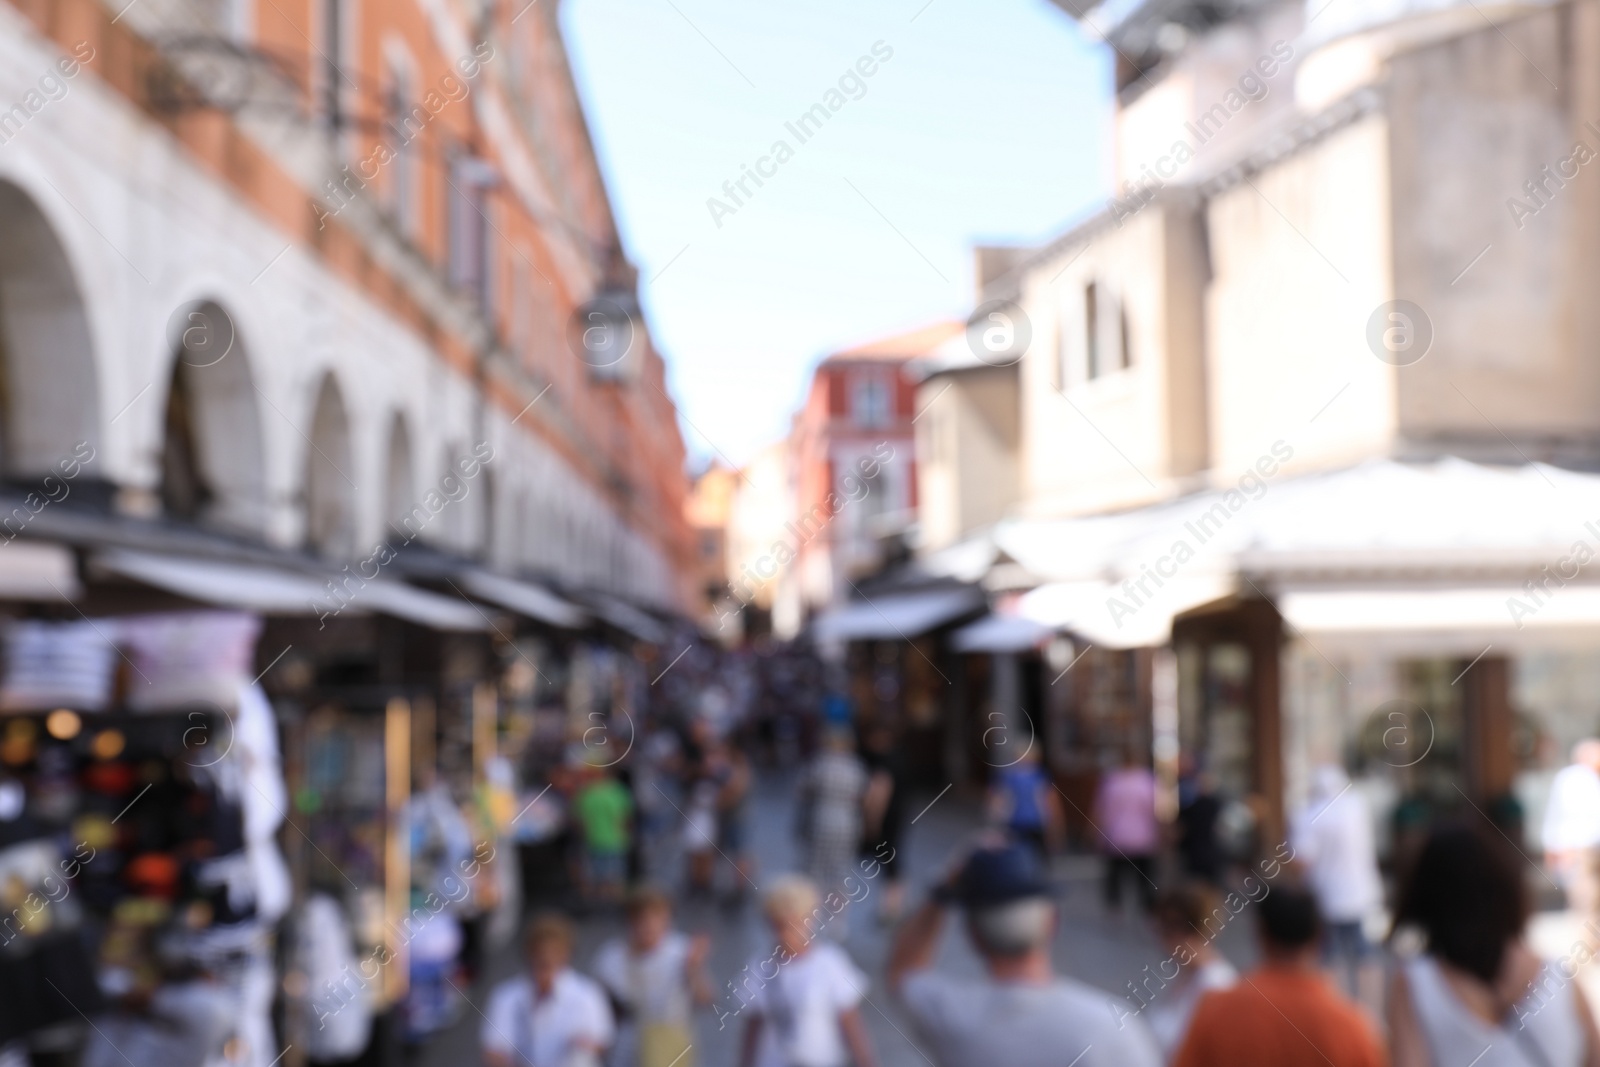 Photo of VENICE, ITALY - JUNE 13, 2019: Blurred view of crowded street with souvenir shops